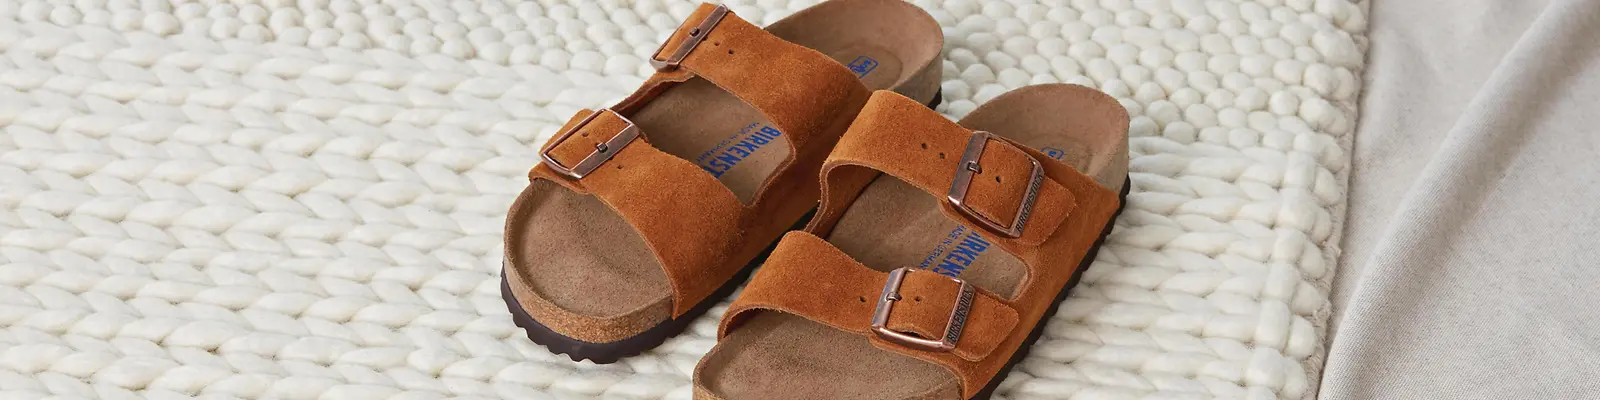 BIRKENSTOCK Boston Men's Suede Shearling Lined Clog | Simons Shoes